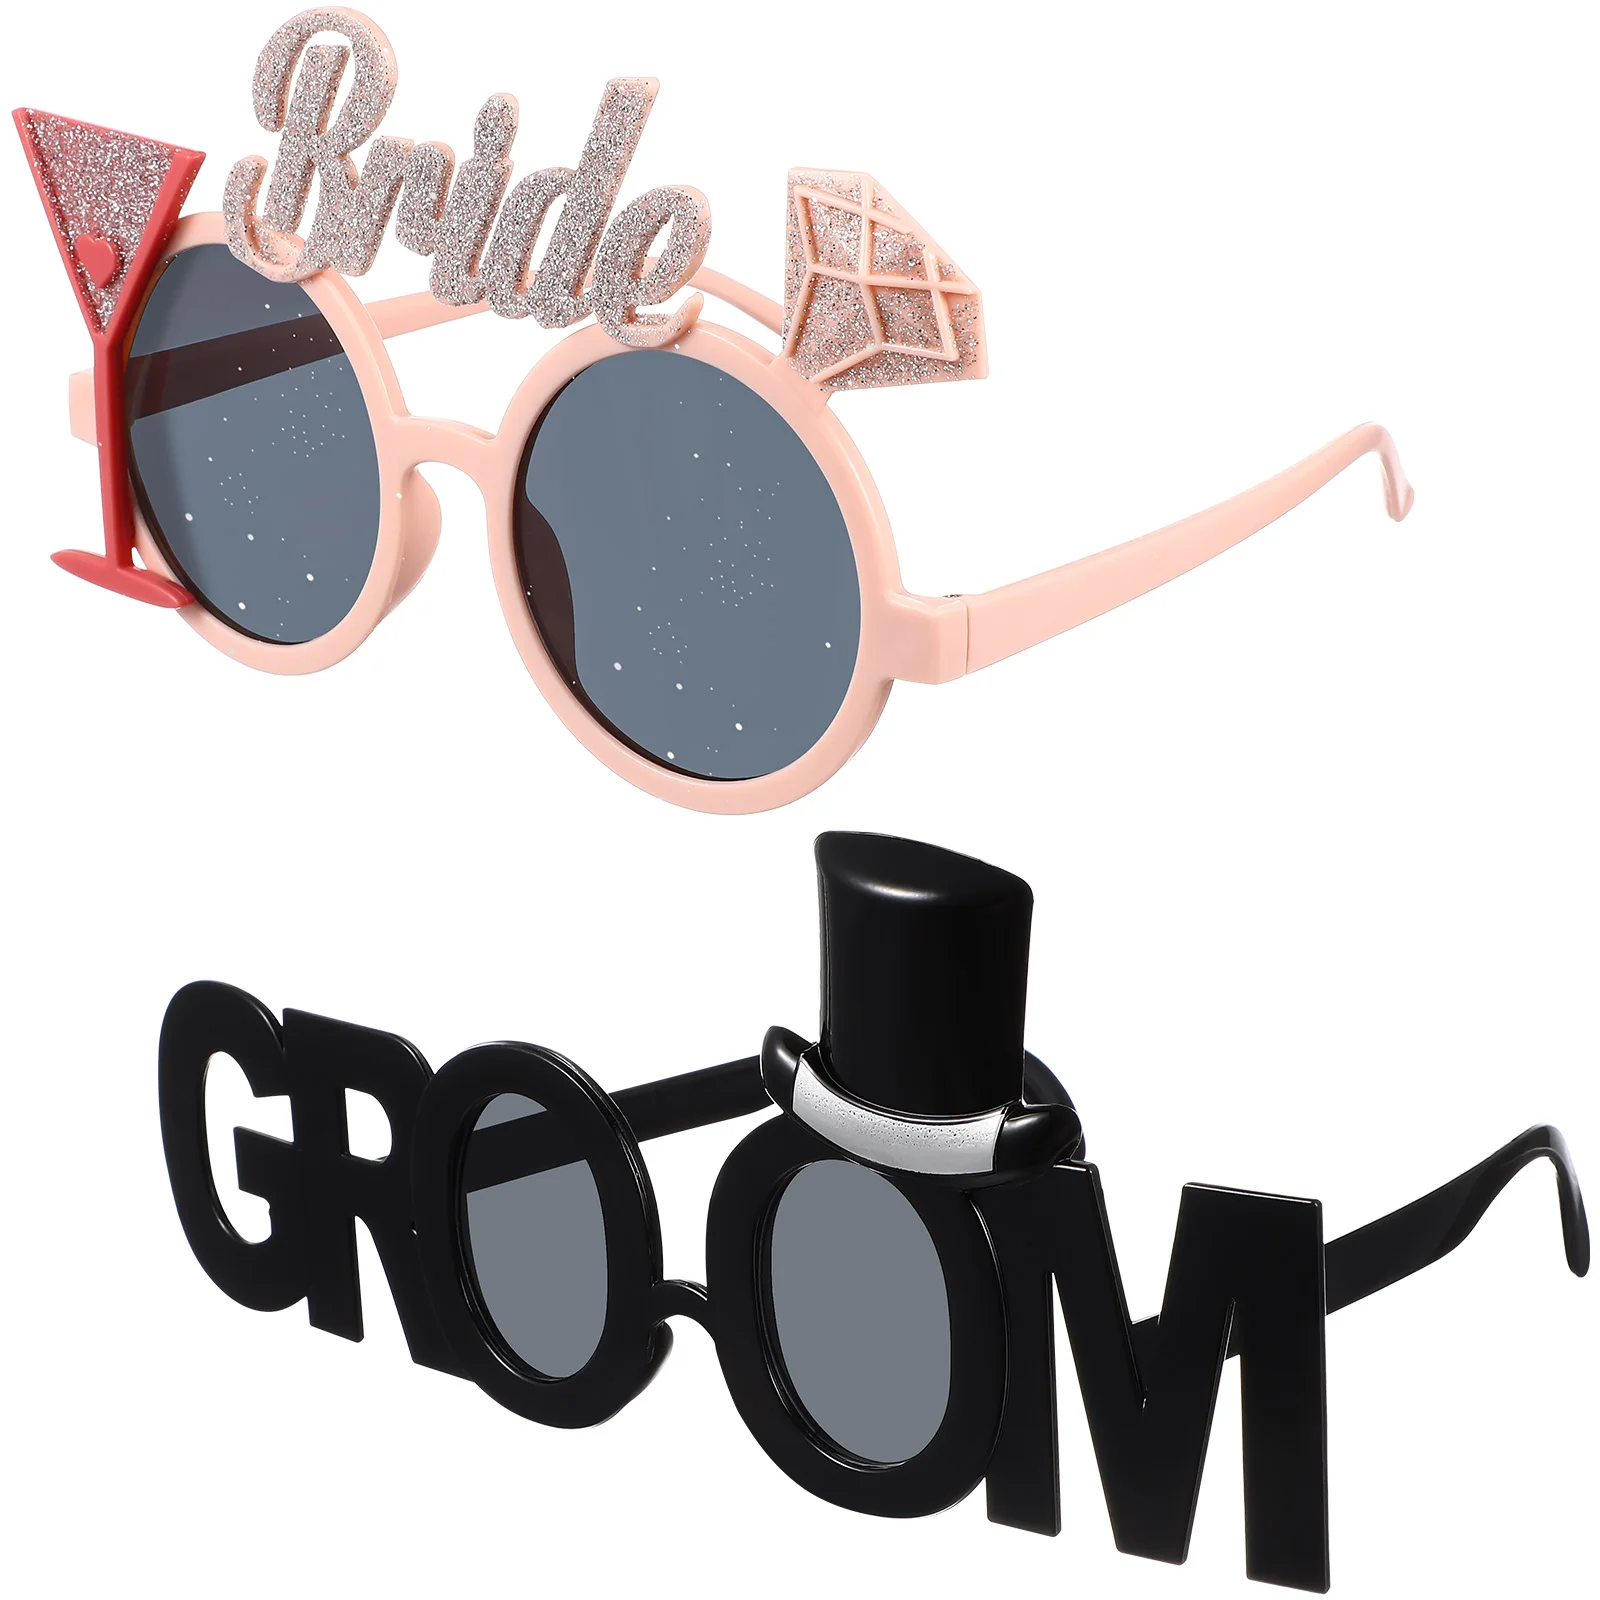 

Bride Groom Sunglasses Wedding Party Eyeglasses Funny Photo Booth Props Bridal Shower Party Favor Supplies Gifts Bachelorette